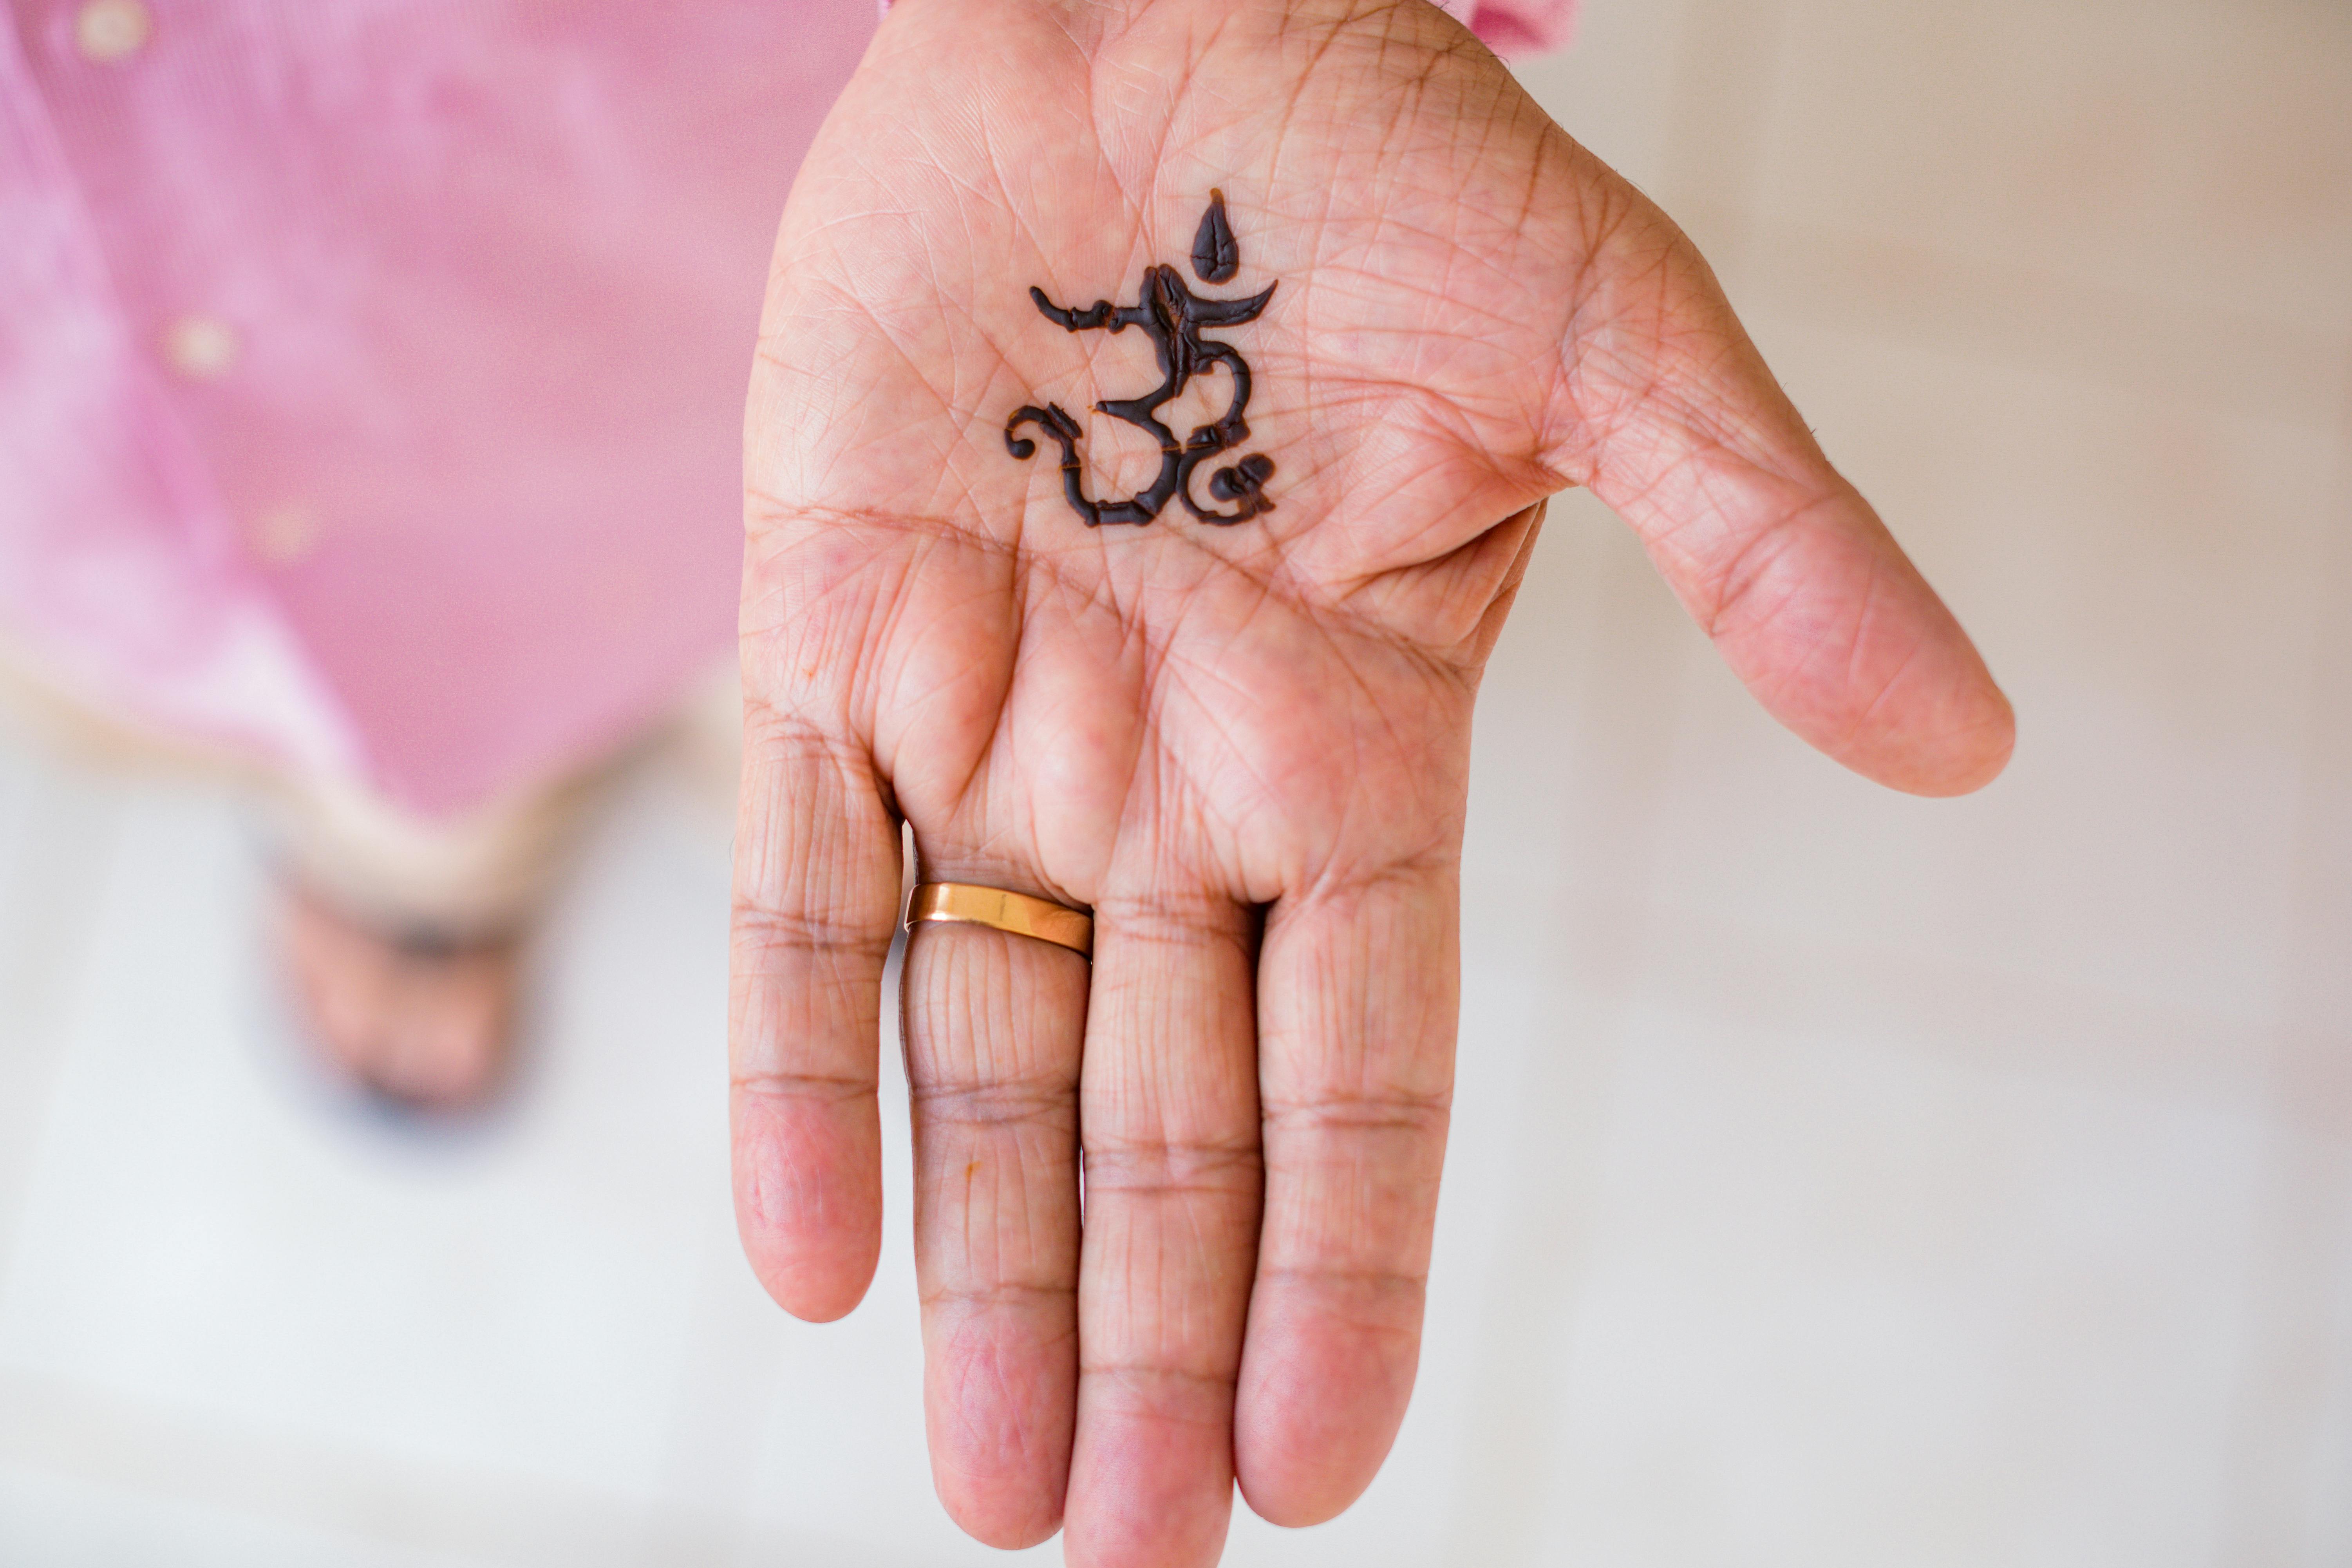 27 Lovely Wedding Ring Tattoos to Make with your Partner | Tiny Tattoo inc.